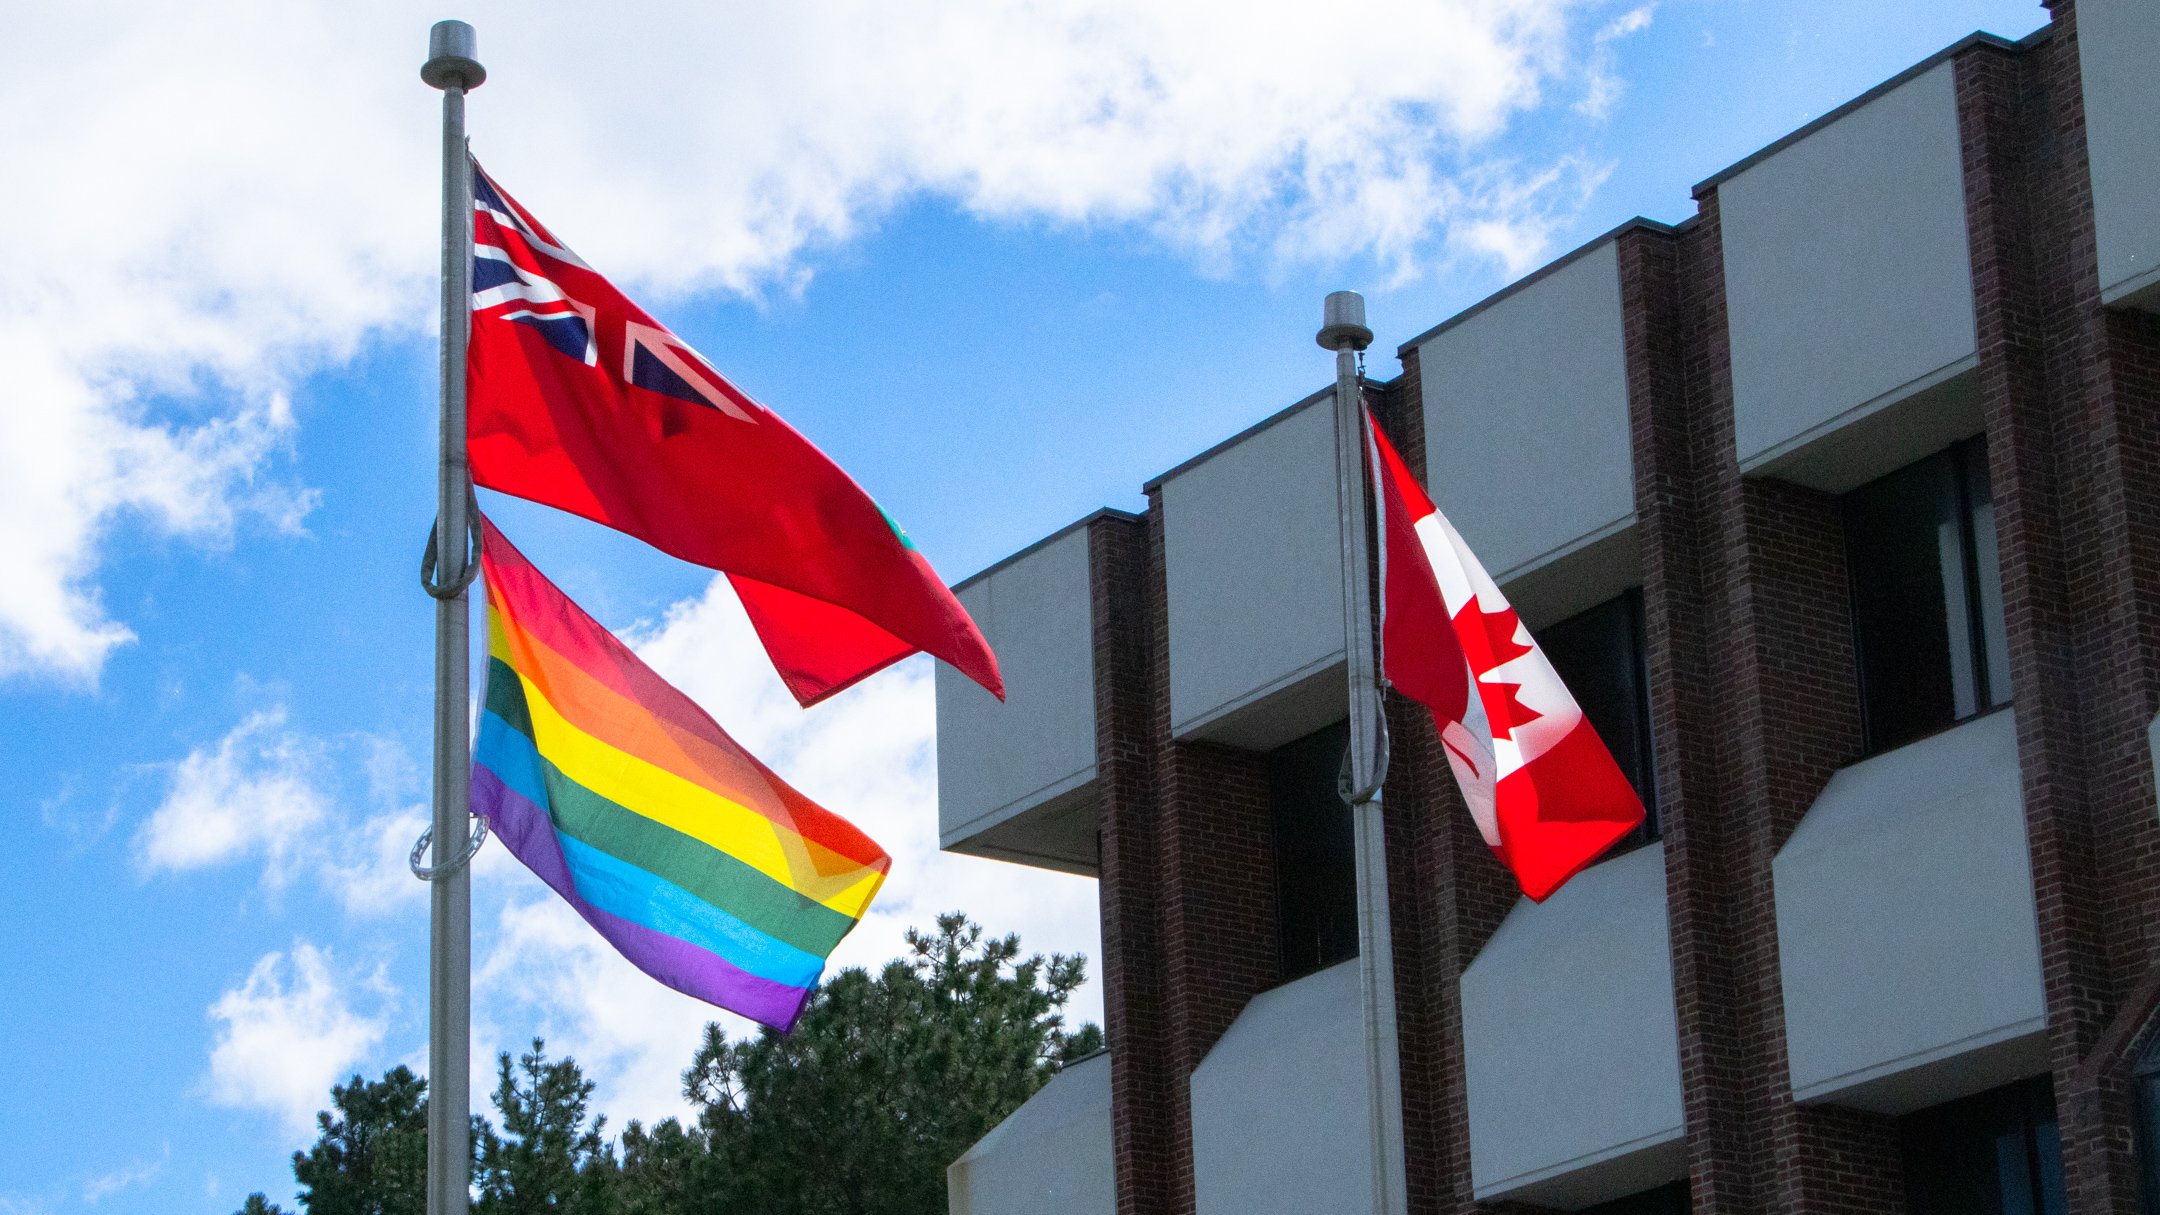 Pride flag flying alongside the Ontario and Canadian flags.